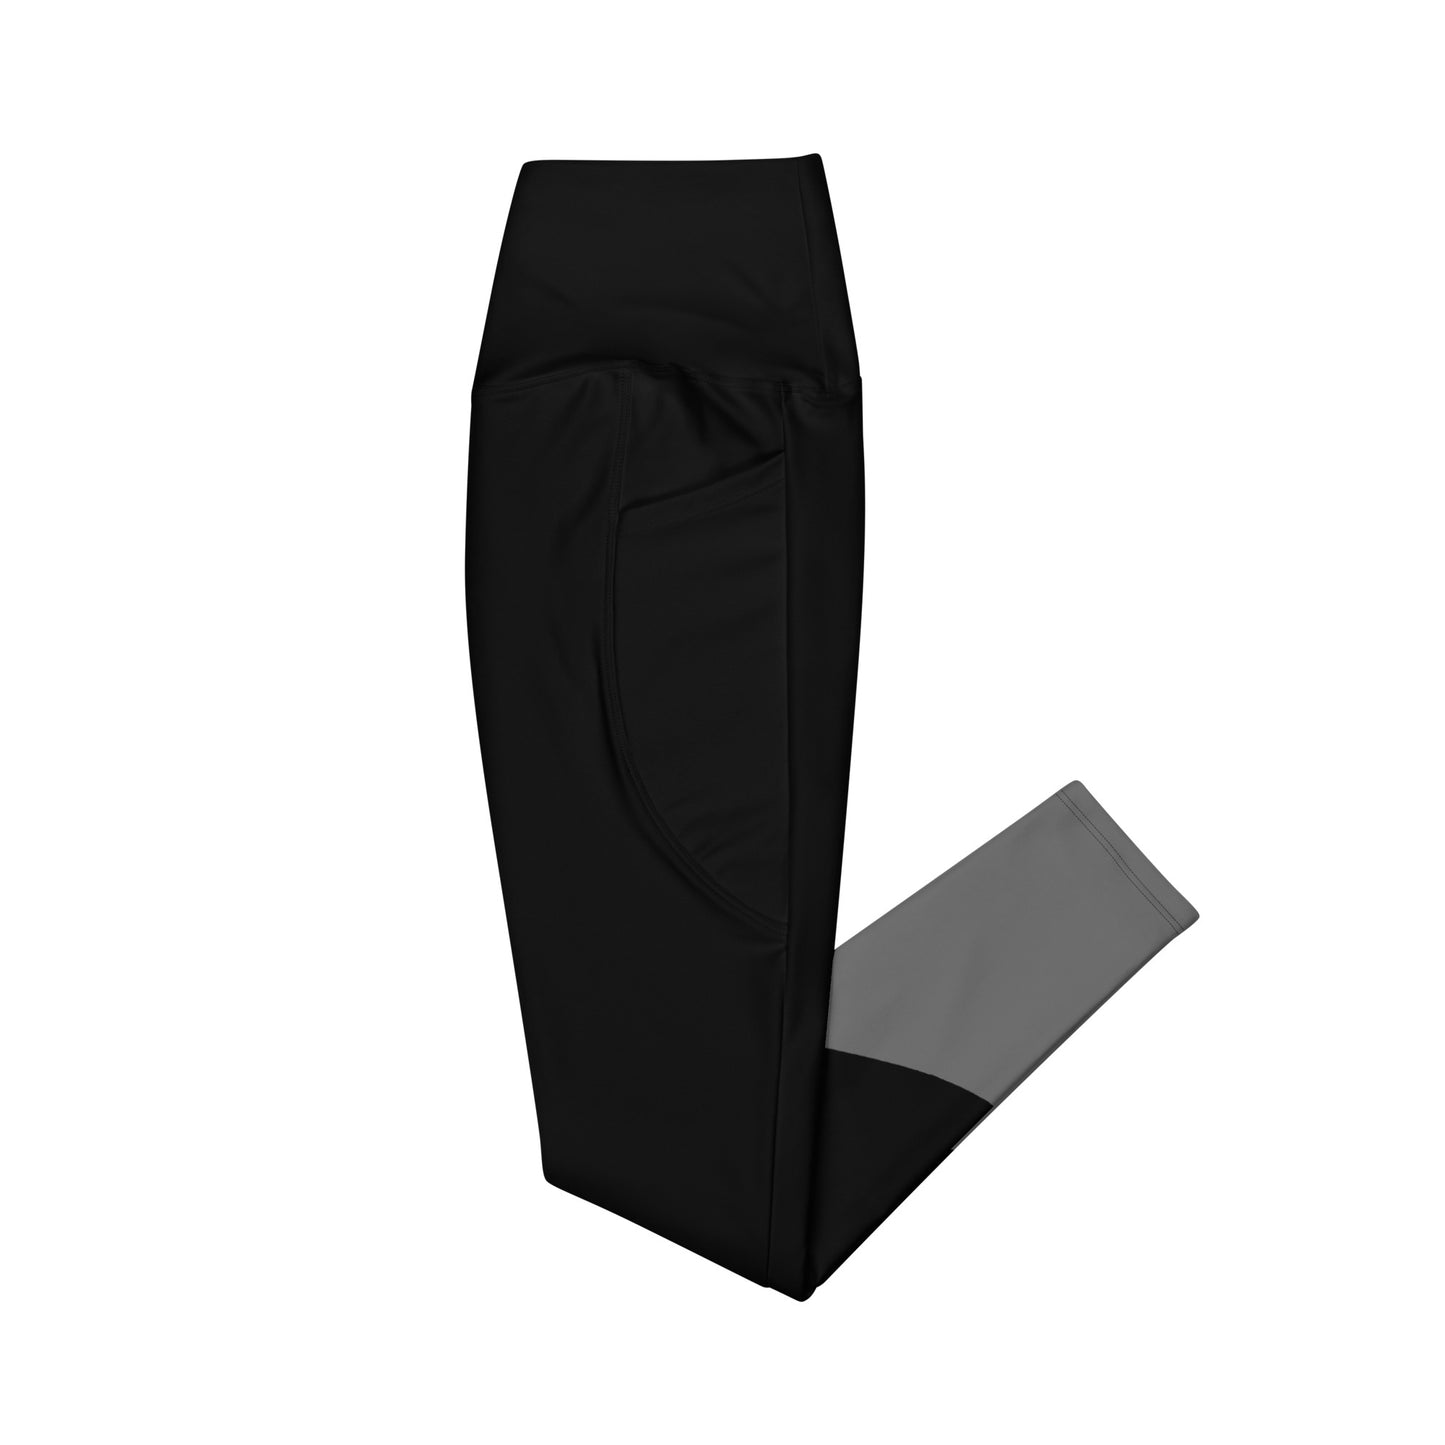 TIME OF VIBES - Leggings with pockets ABSTRACT (Black) - €59.00